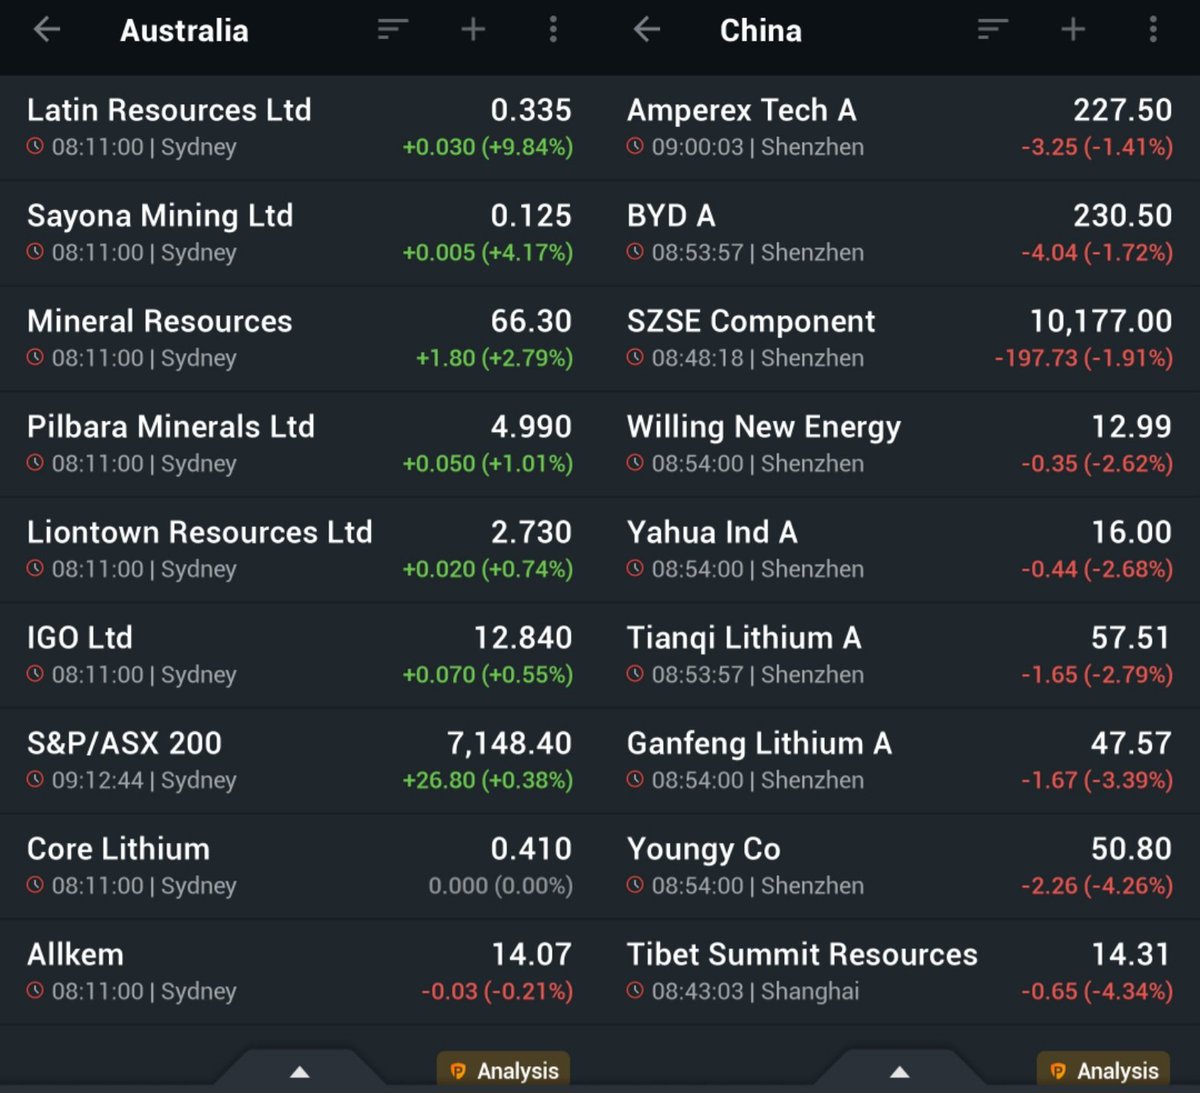 ASX #lithiumstocks continue to recover despite weak results of Wall Street and Chinese peers.
$LRS takes the lead of Wednesday rally on no news.
#asxstocks #chinesestocks